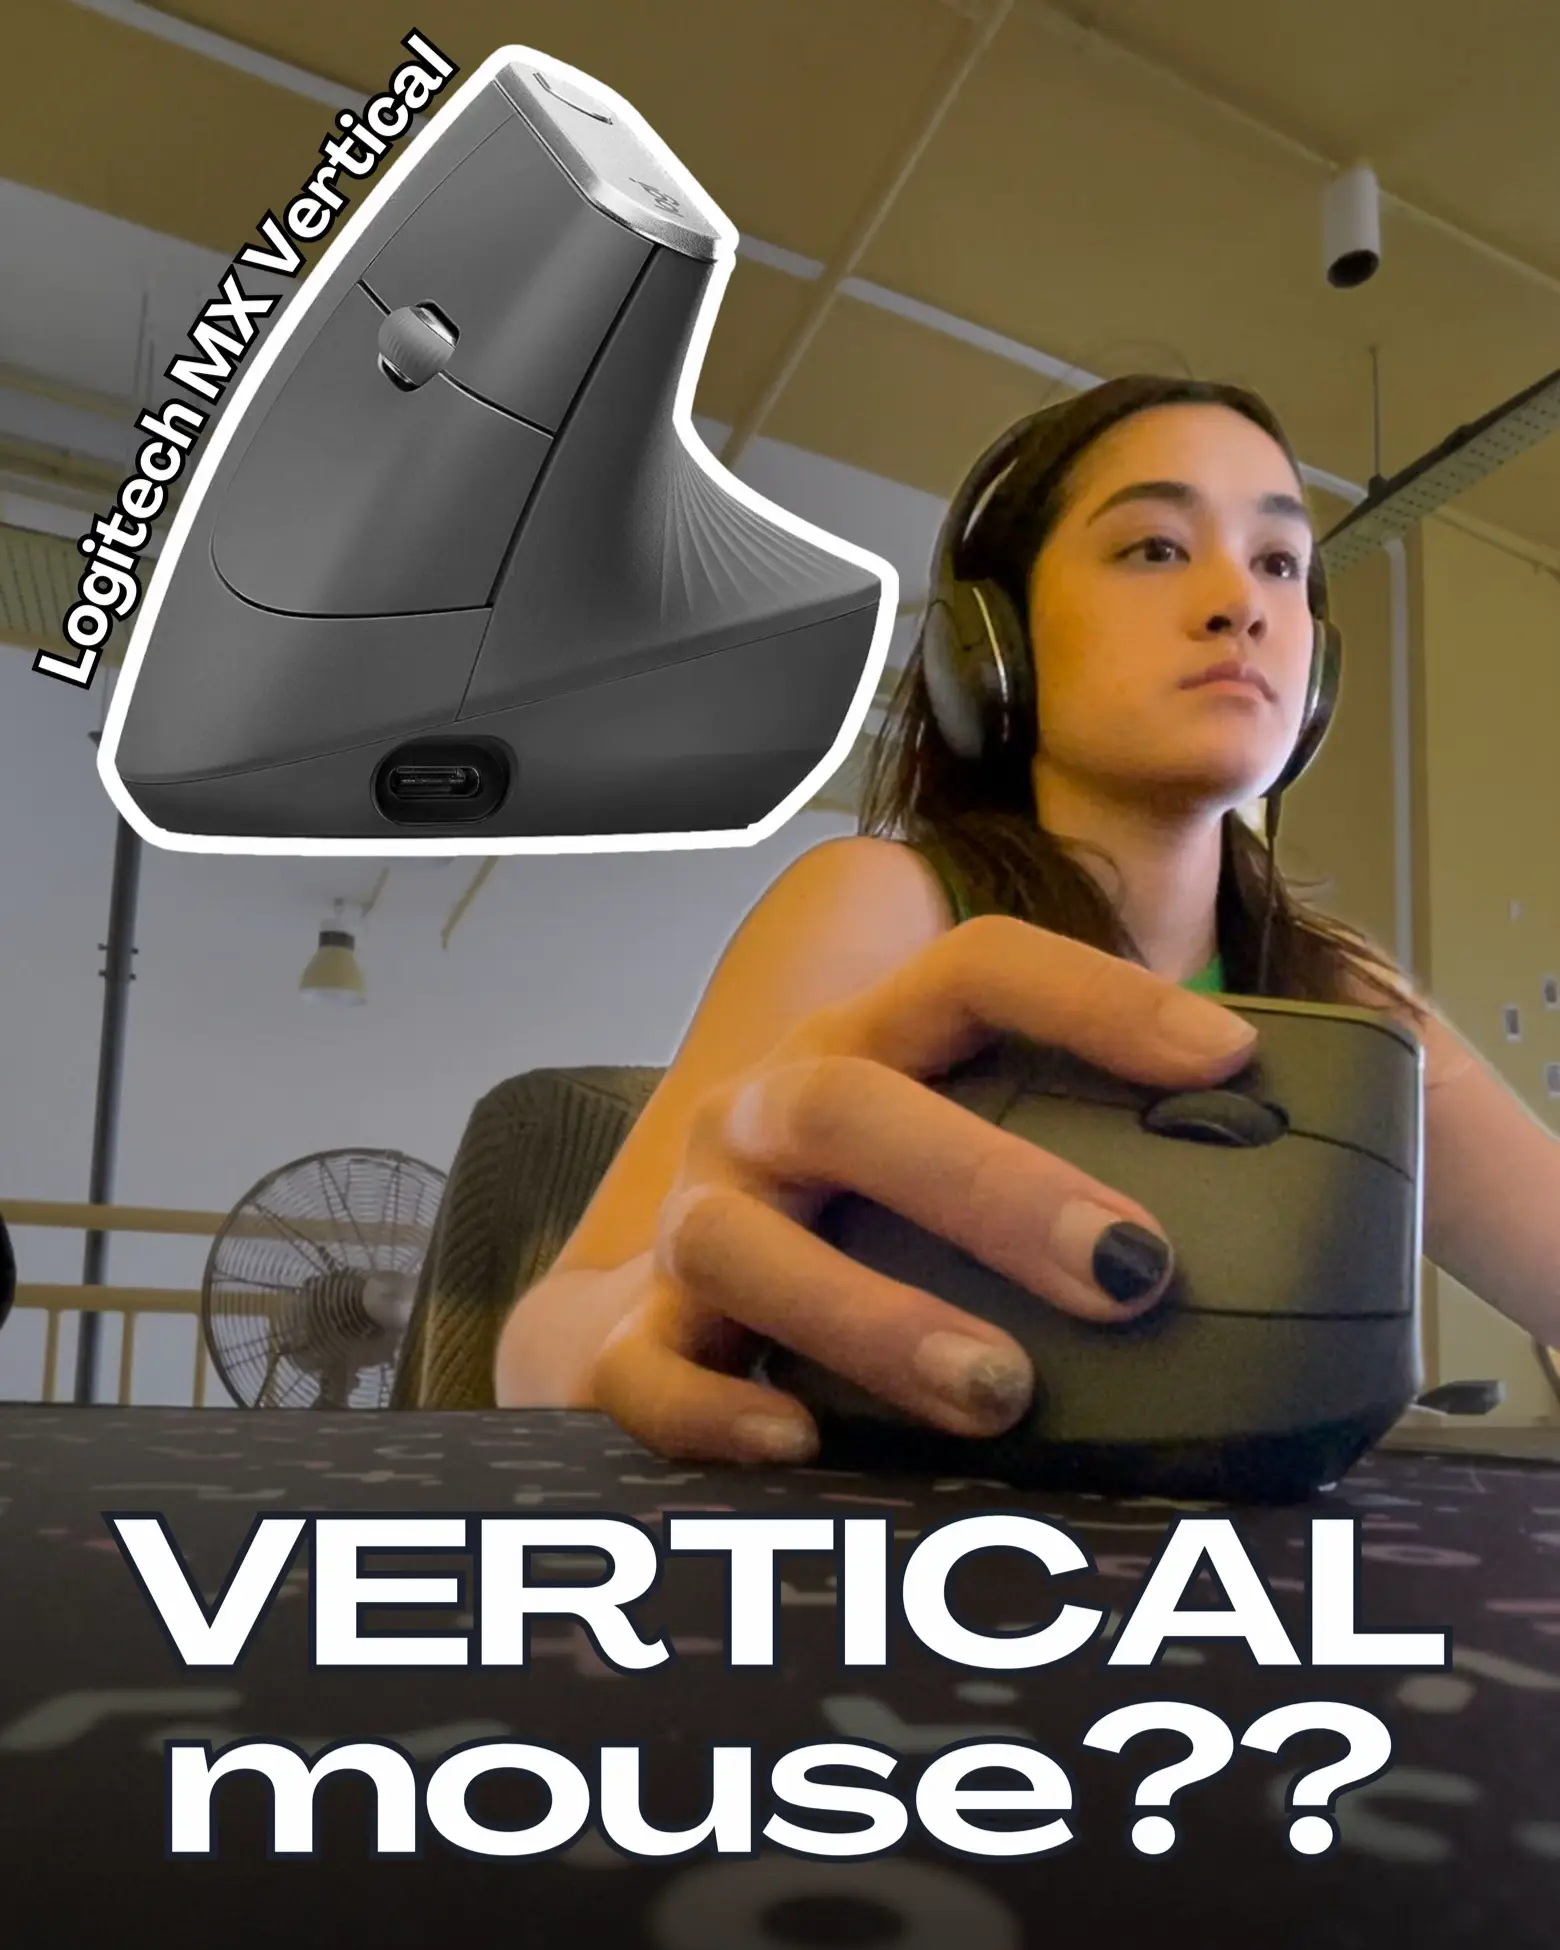 Logitech MX Vertical review: Tackling mouse ergonomics from a new angle